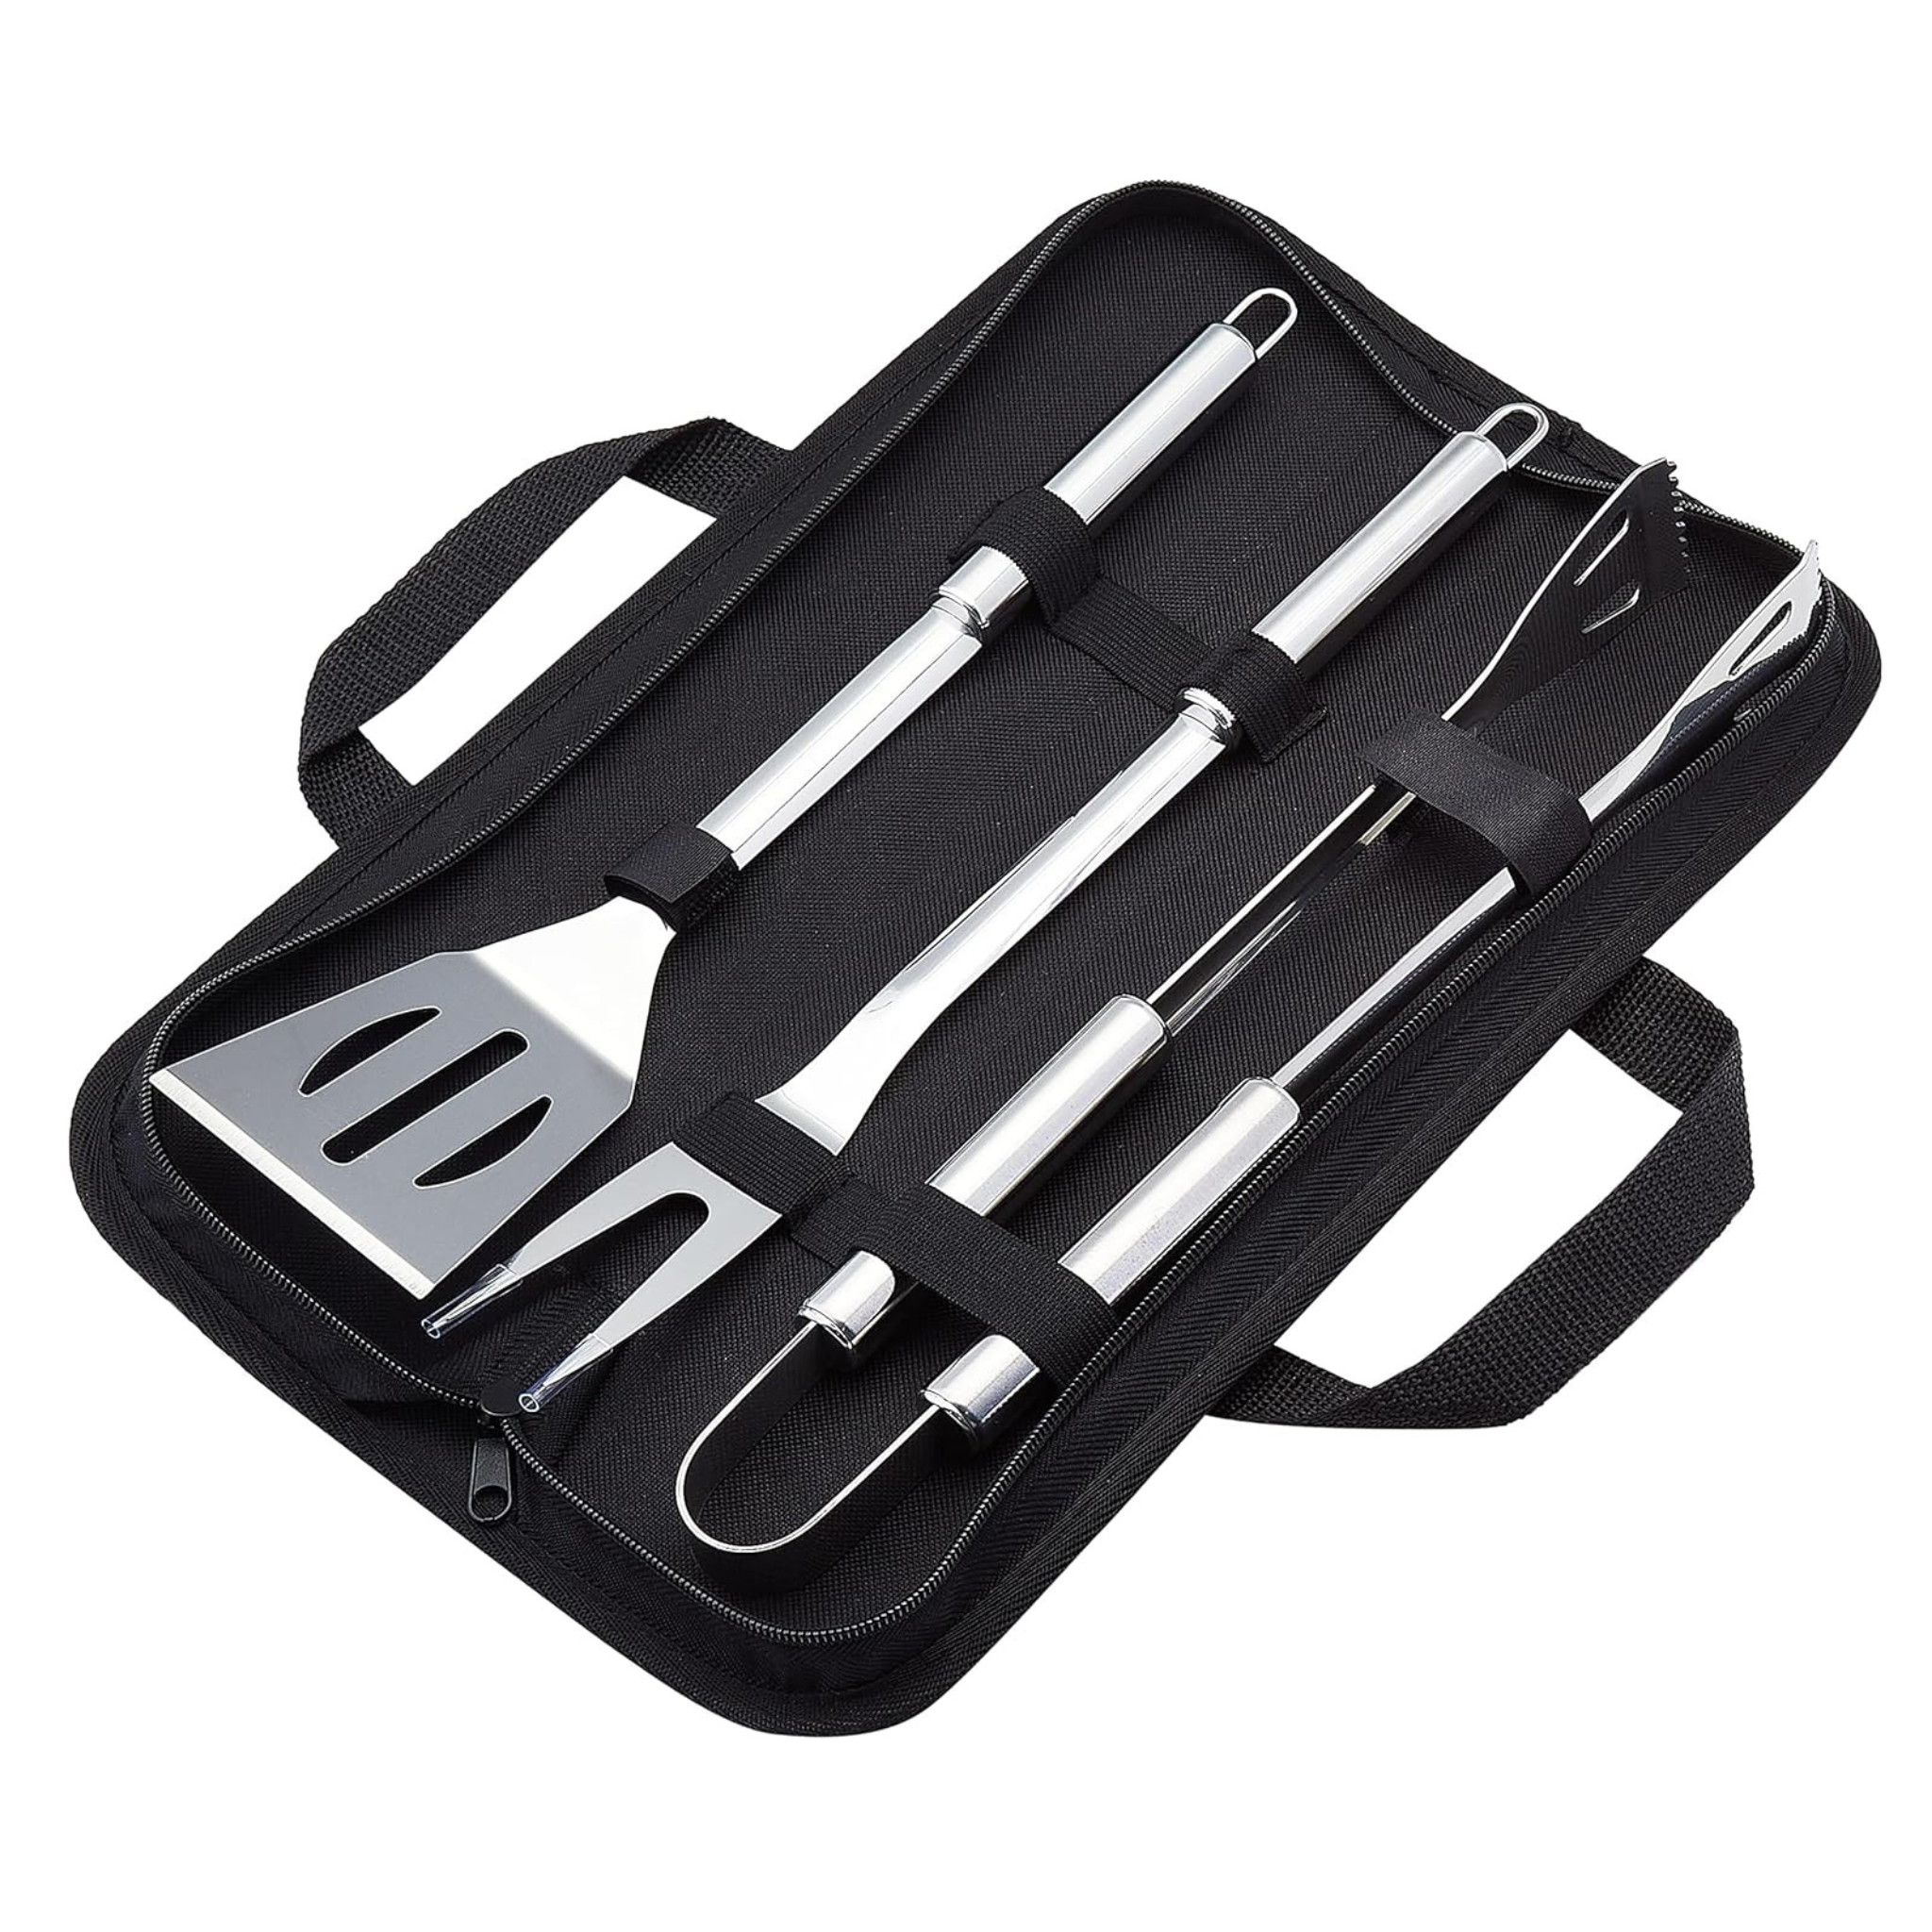 Amazon Basics 4-Piece Stainless Steel Barbeque Grilling Tool Set